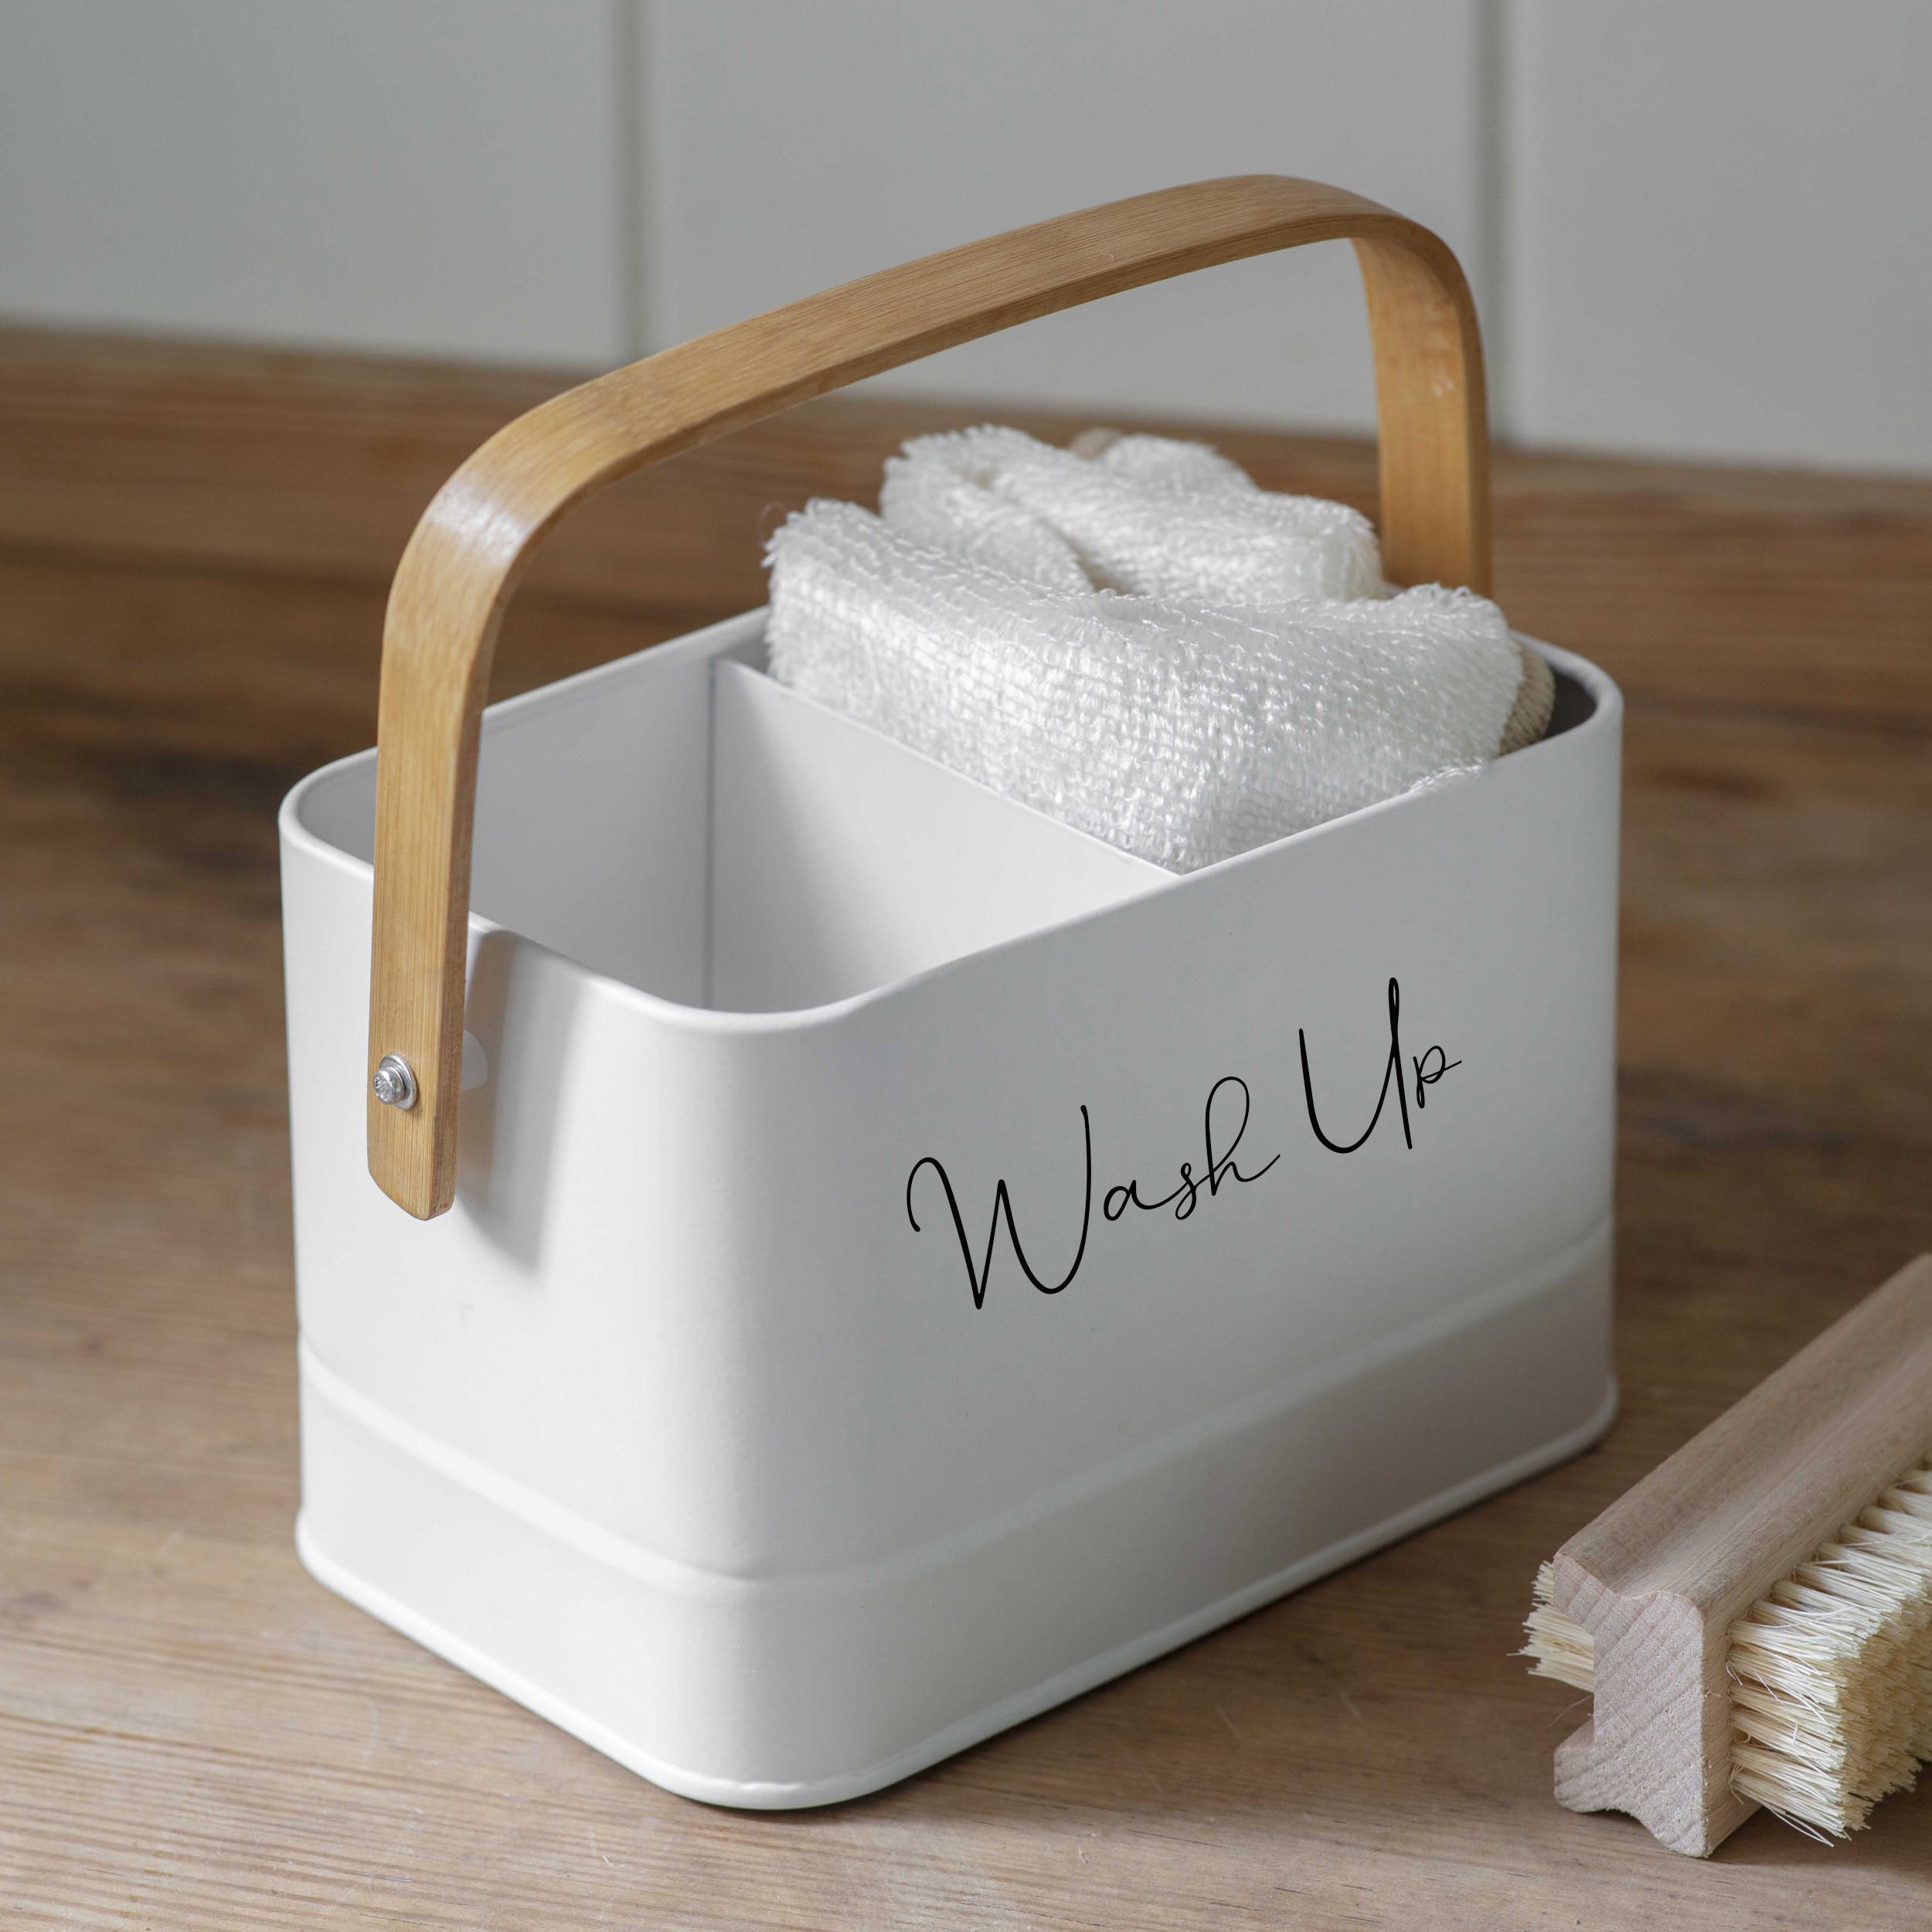 Cleaning Storage Caddy With Bamboo Handle Kitchen Sink Tidy Organiser  Cleaning Supplies 